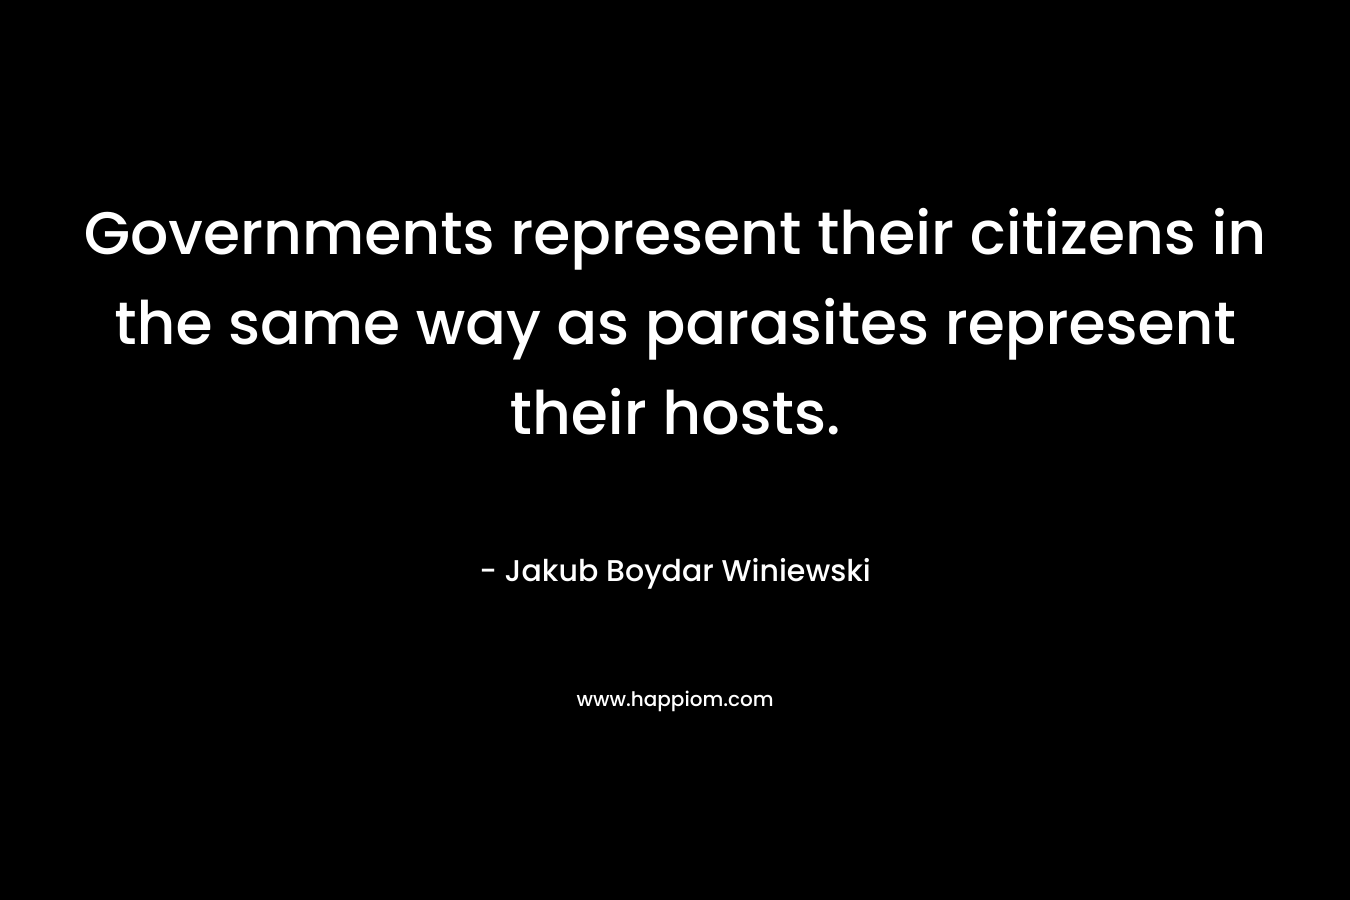 Governments represent their citizens in the same way as parasites represent their hosts.